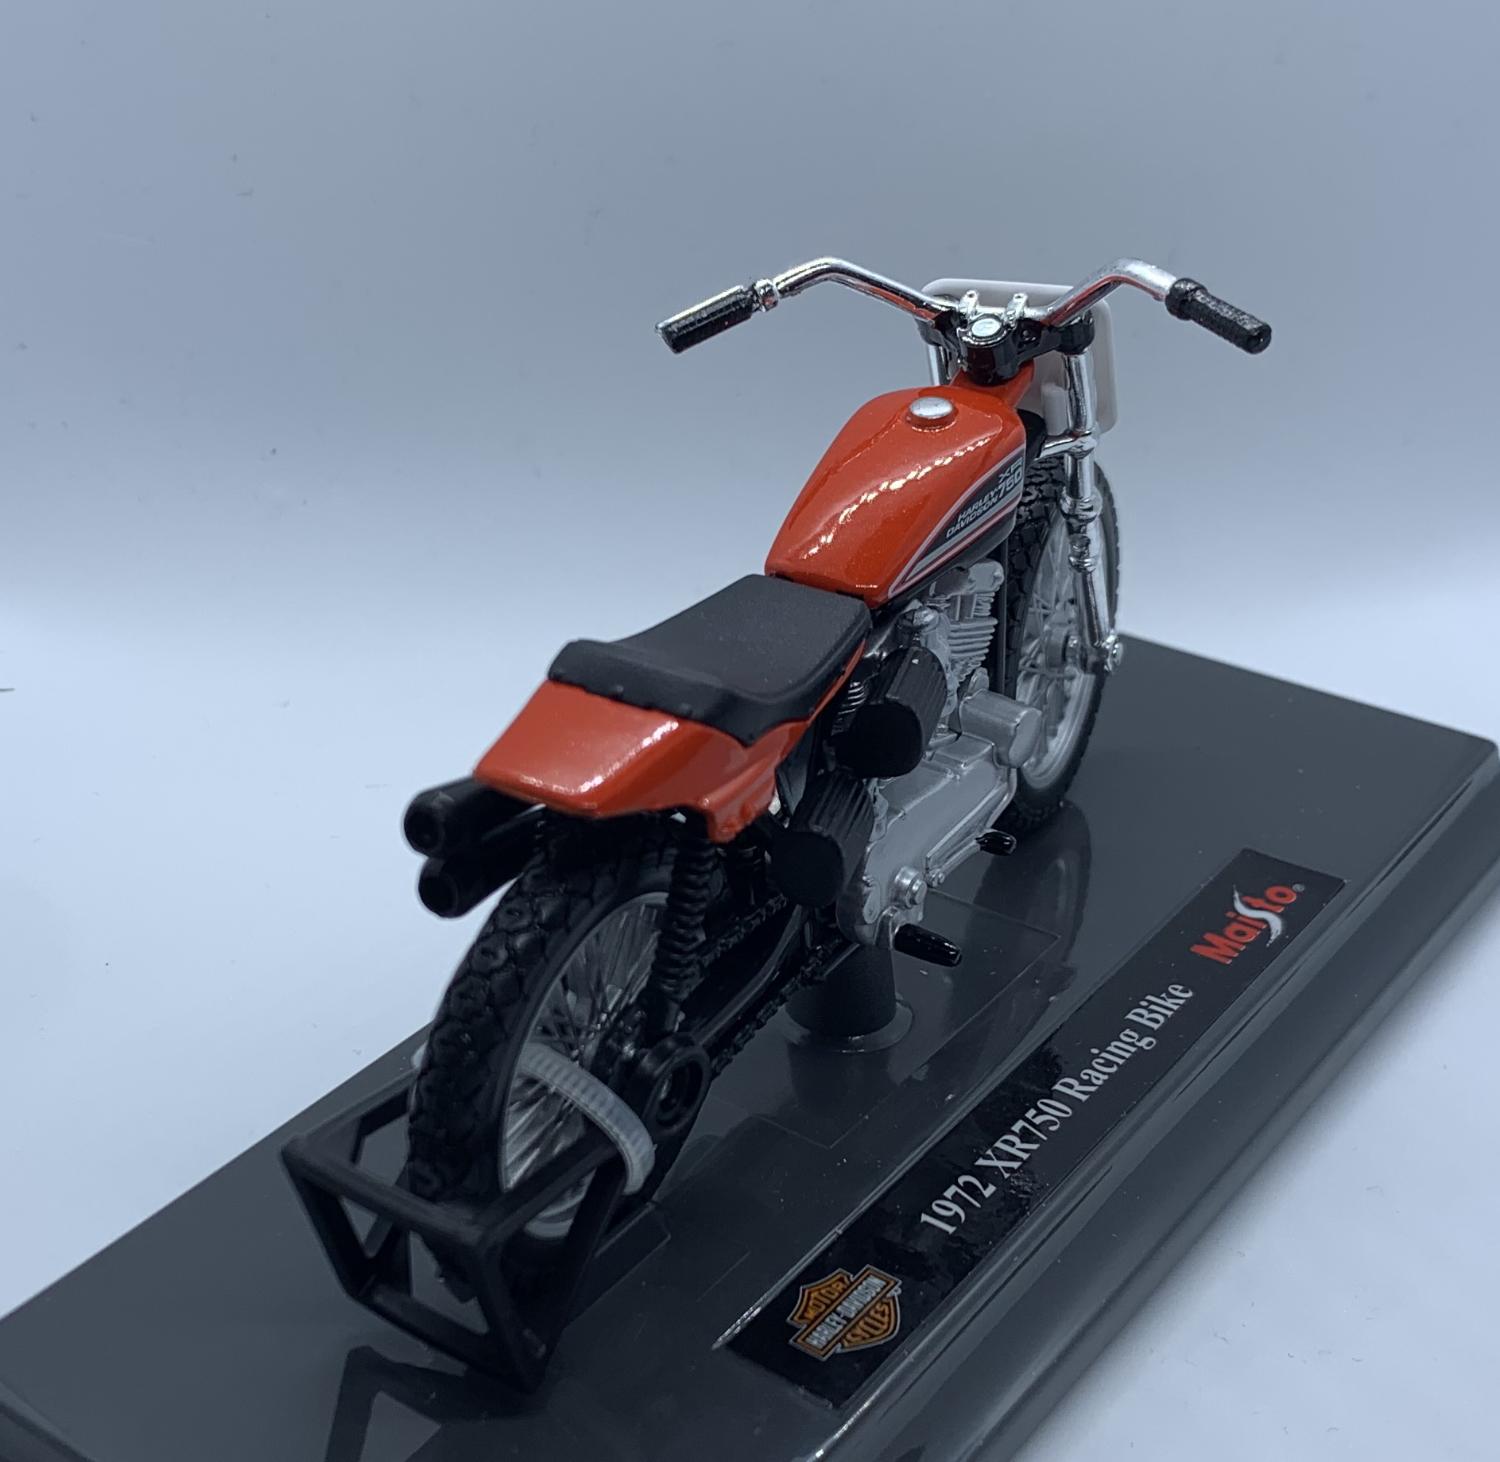 Harley Davidson 1972 XR750 Racing Bike in red 1:18 scale model from Maisto